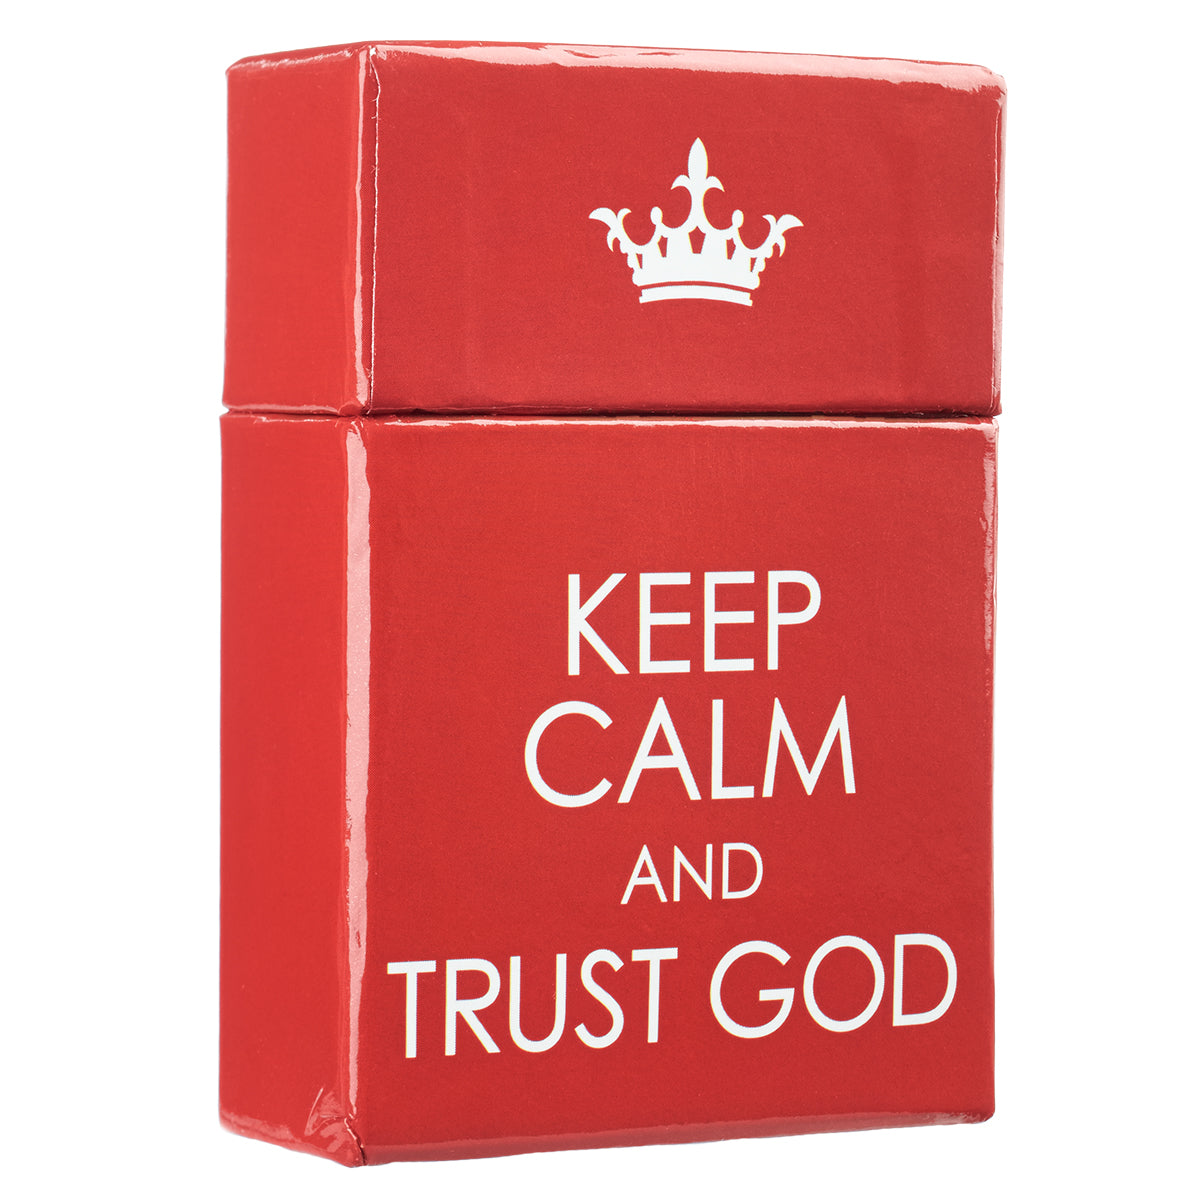 Keep Calm and Trust God Box of Blessings - The Christian Gift Company